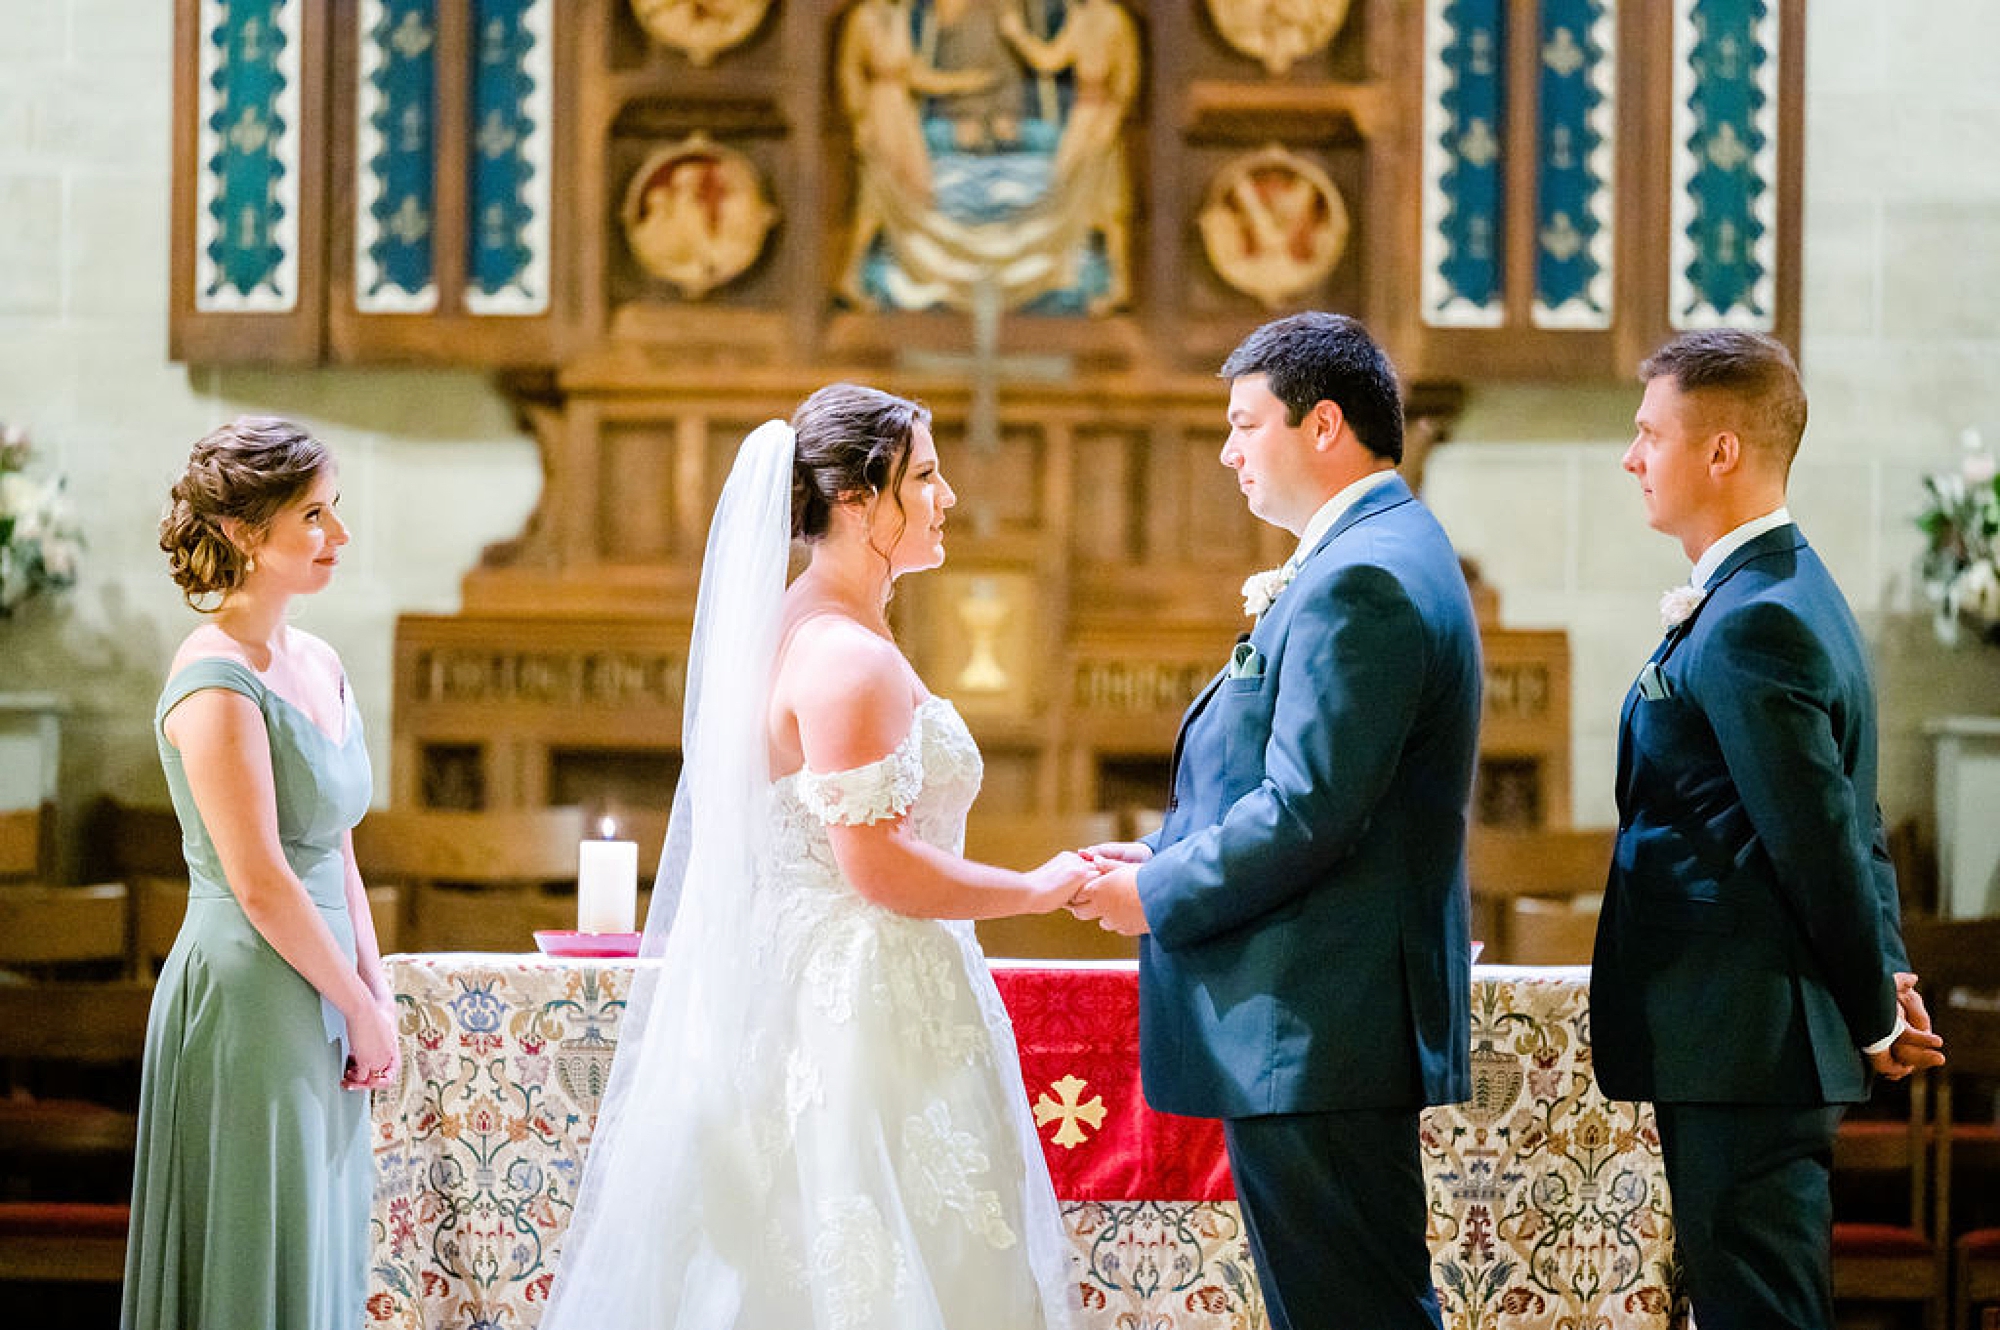 newlyweds hold hands exchanging vows during traditional church wedding at Saint Andrews in Delaware